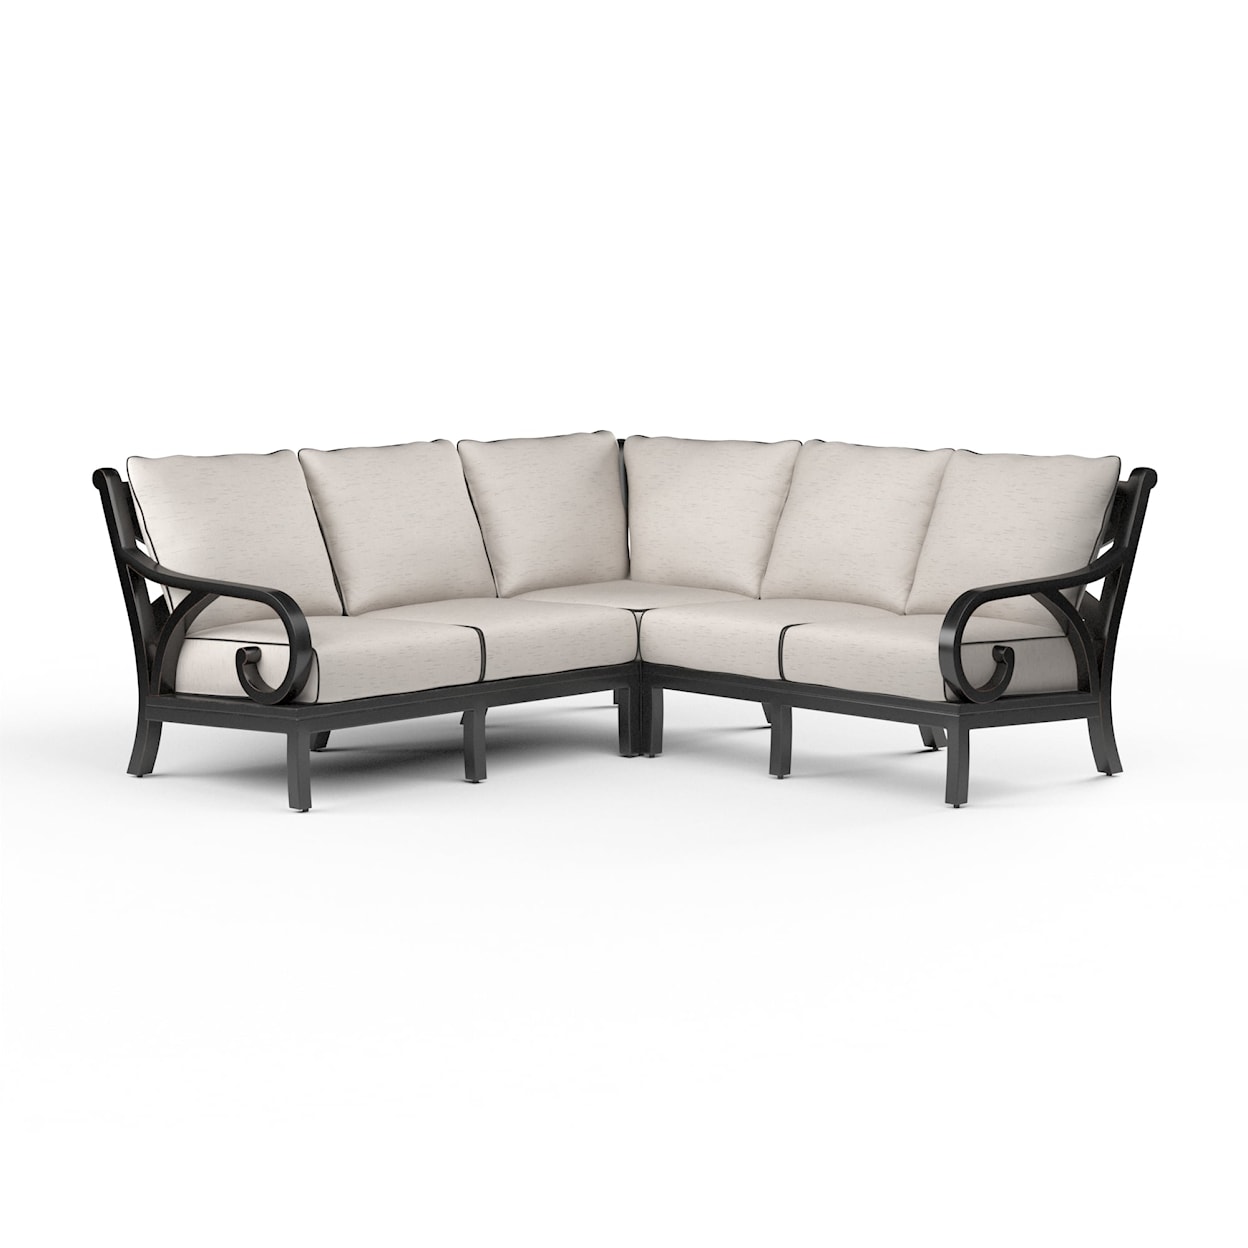 Sunset West Monterey Sectional Sofa